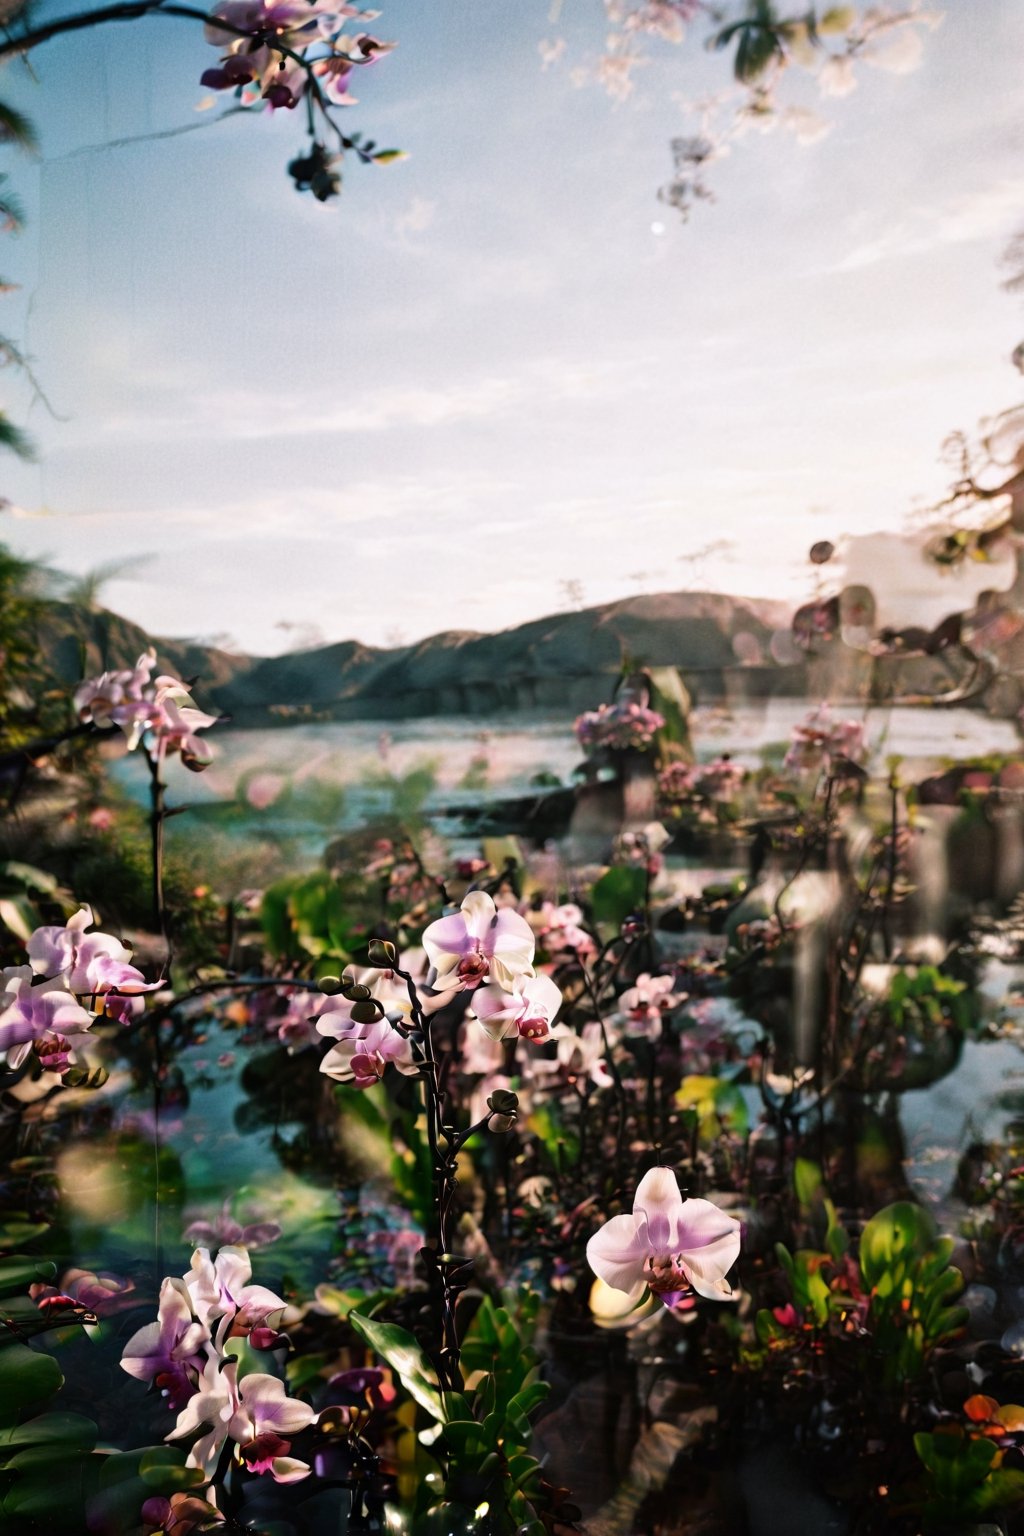 nature background, landscape, distortion, blur, meme, dreamcore, desaturation , brightness, chromatic distortion,analog photography, camera lens distortion, fantastic, daydream, liminal spaces, dreams, realistic nature, analog record, orchids, tropical